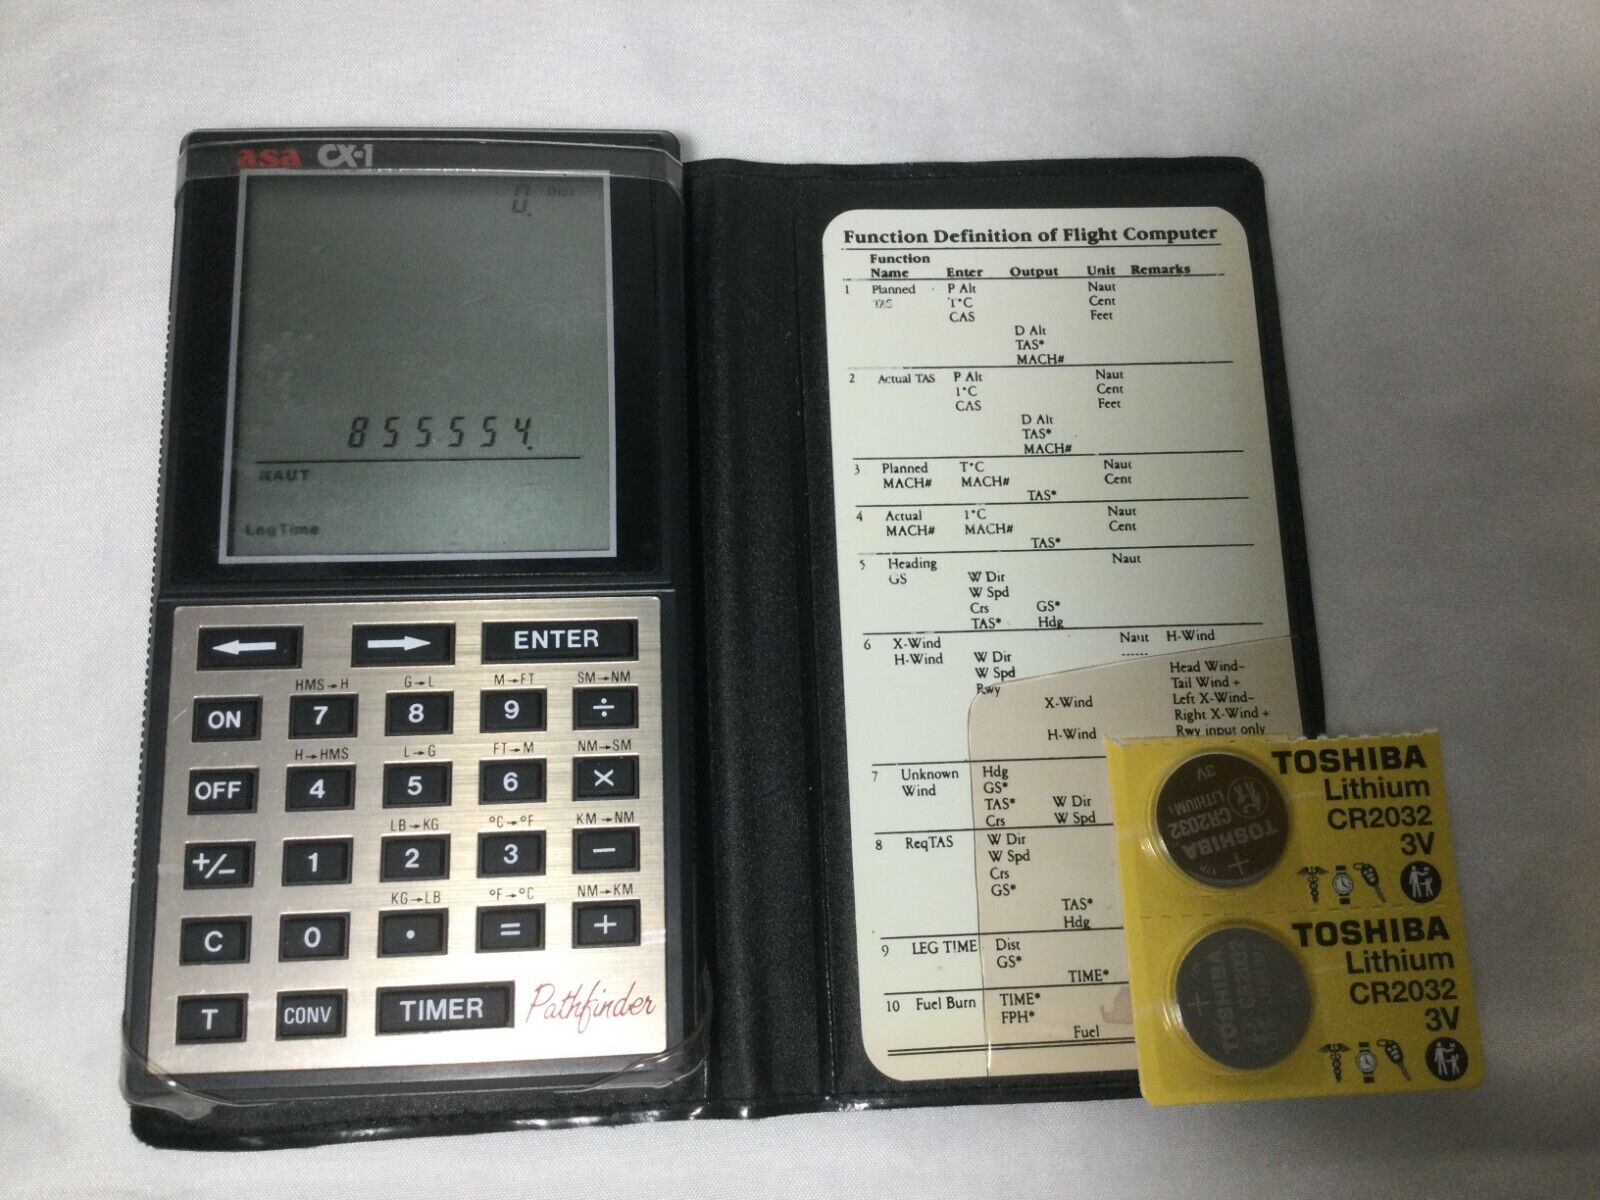 ASA CX-1 Pathfinder Flight Calculator with Case, Card and Fresh Battery - BLACK